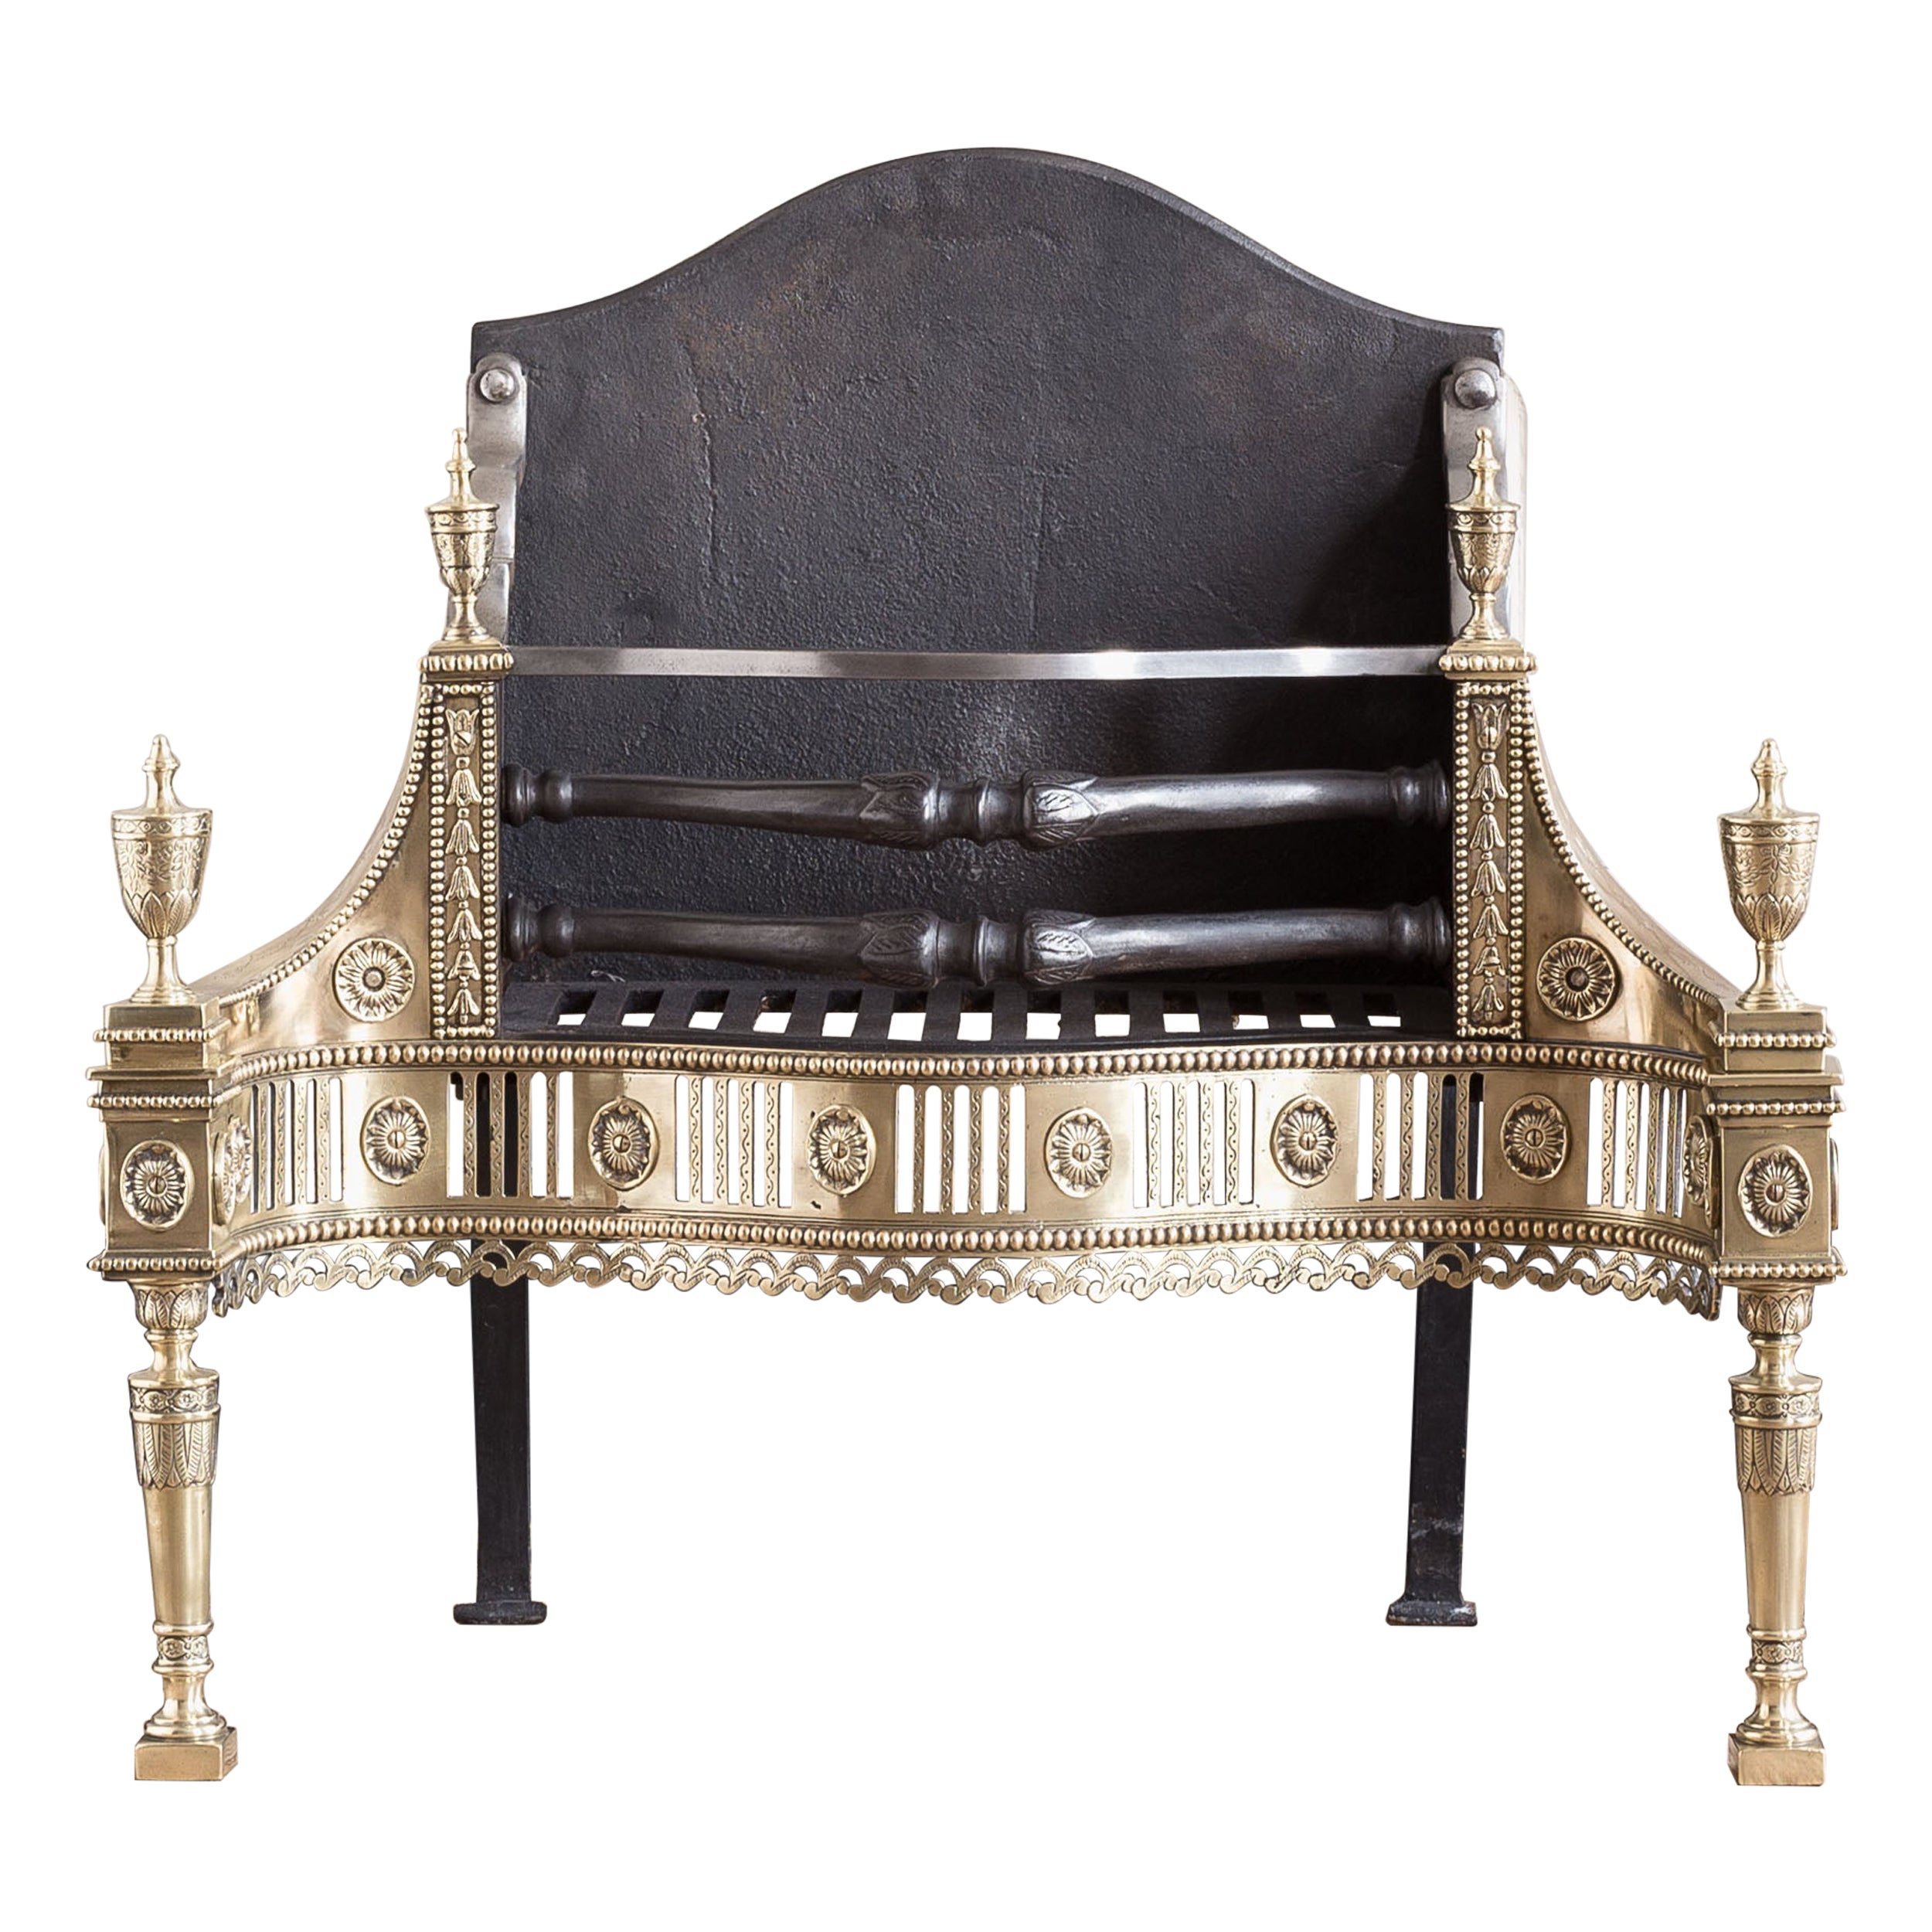 English Neo-Classical Brass and Iron Fire Basket